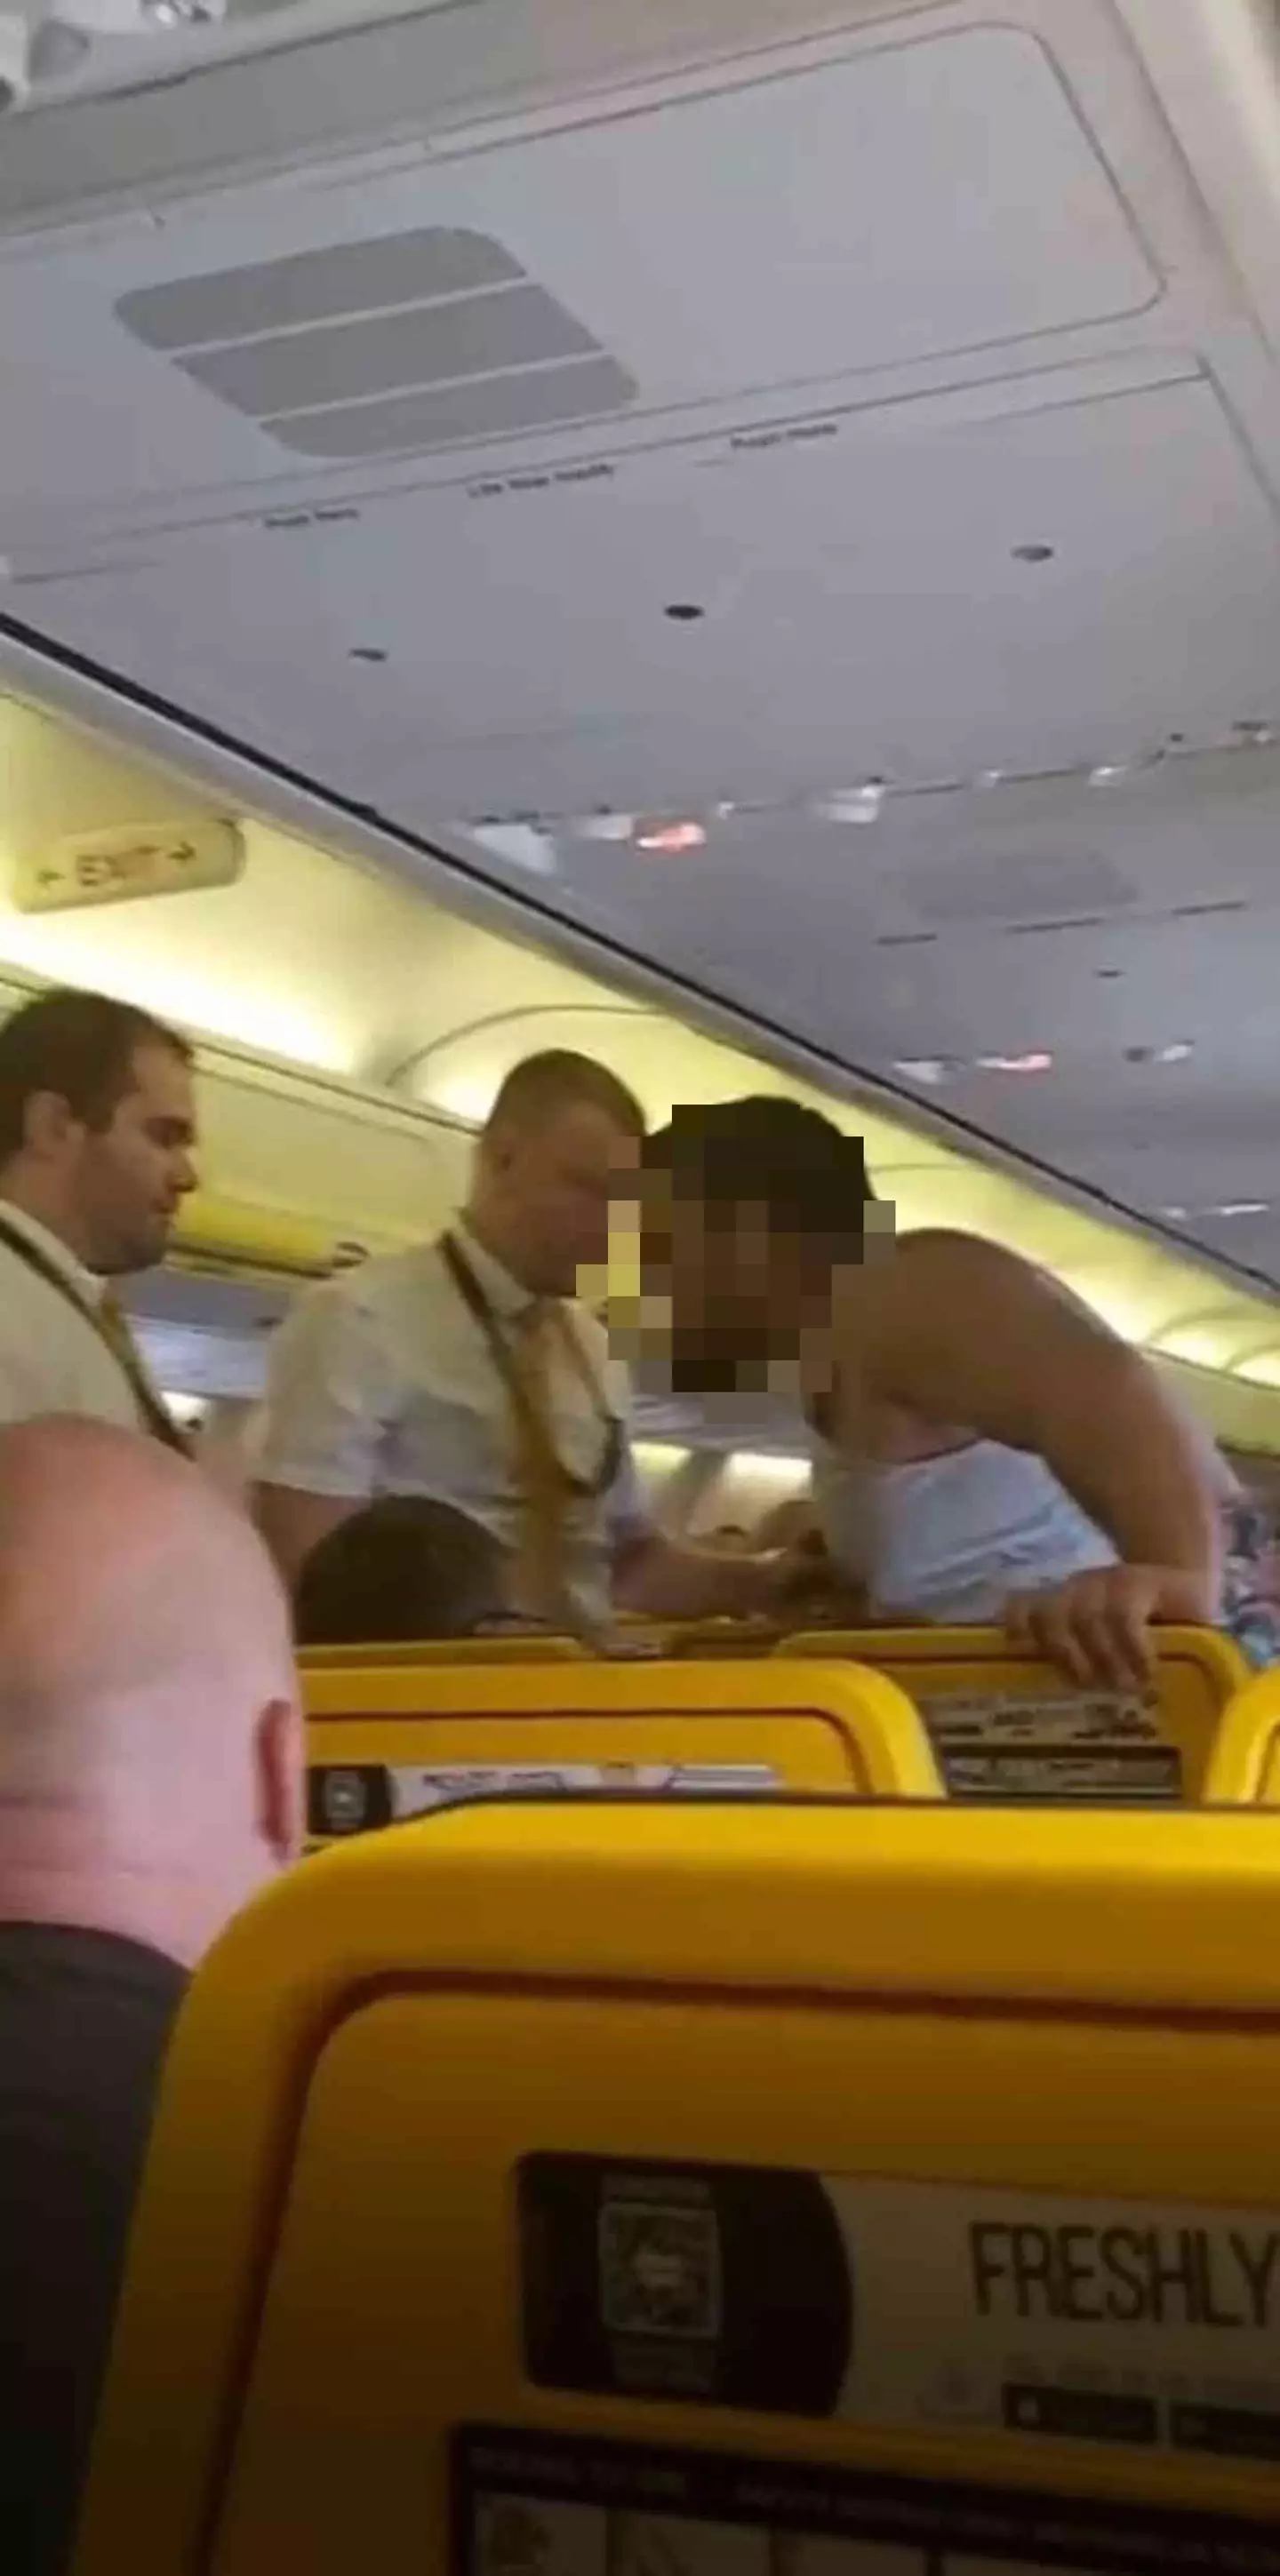 Passengers had to restrain him and perform a 'citizens arrest'.